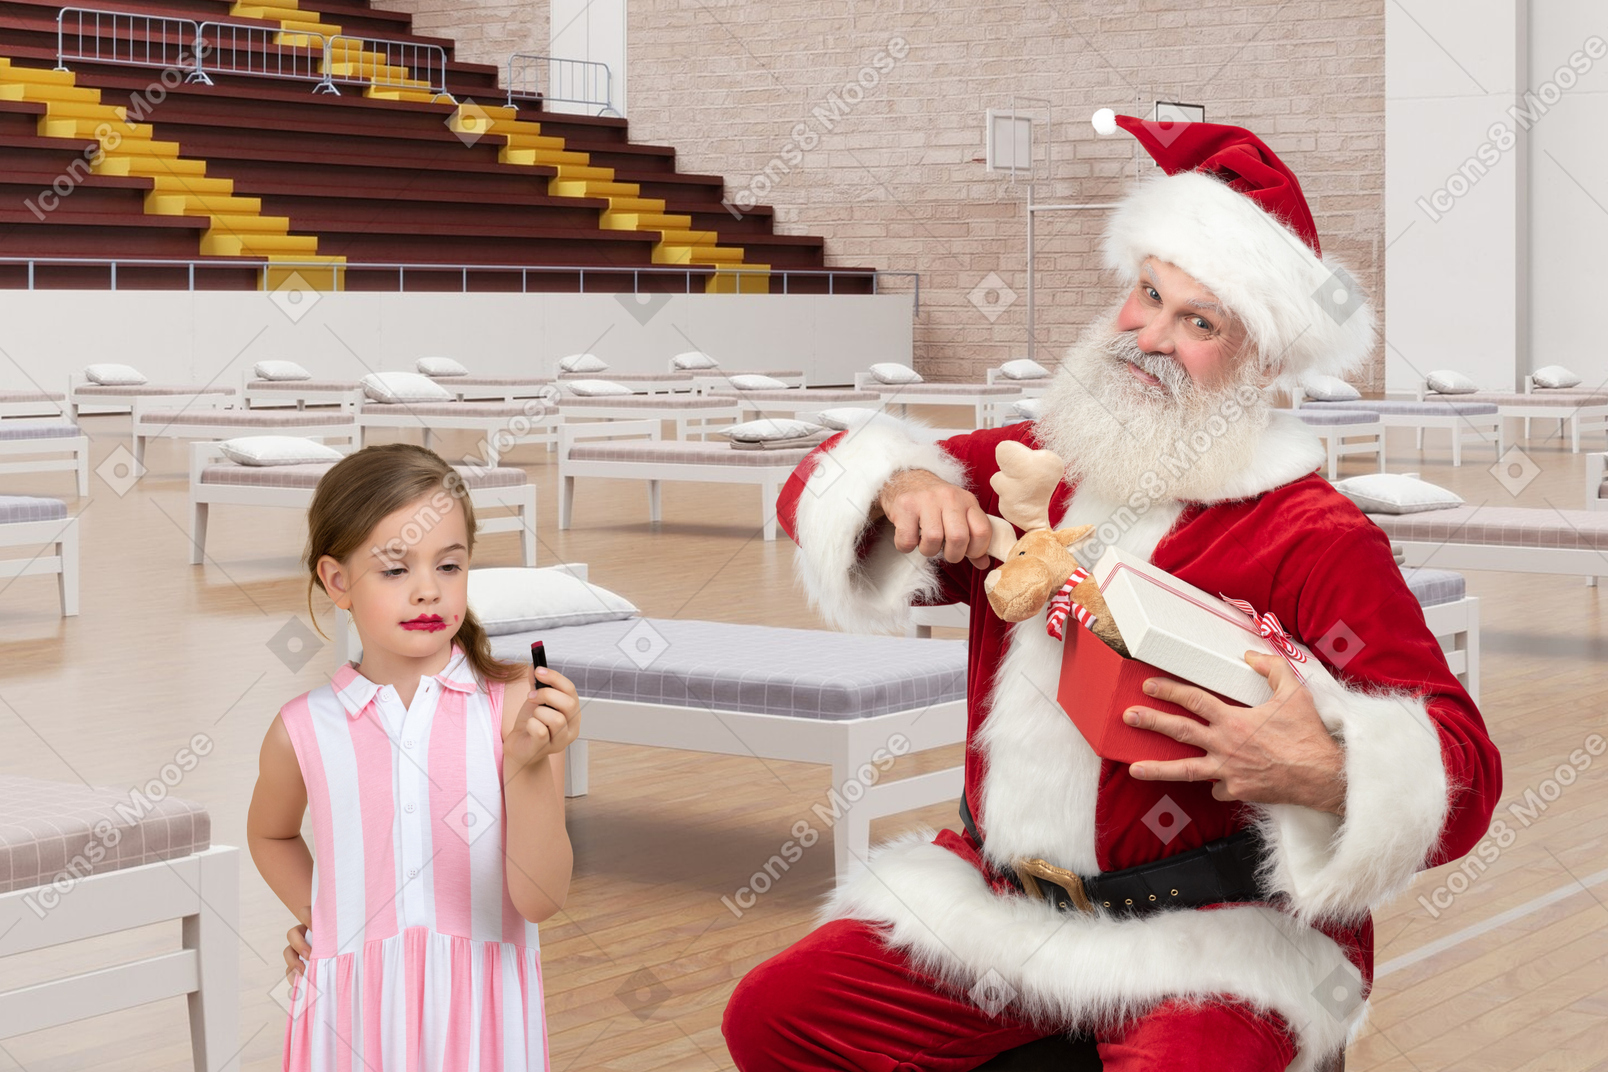 Santa and a little girl in a temporary hospital